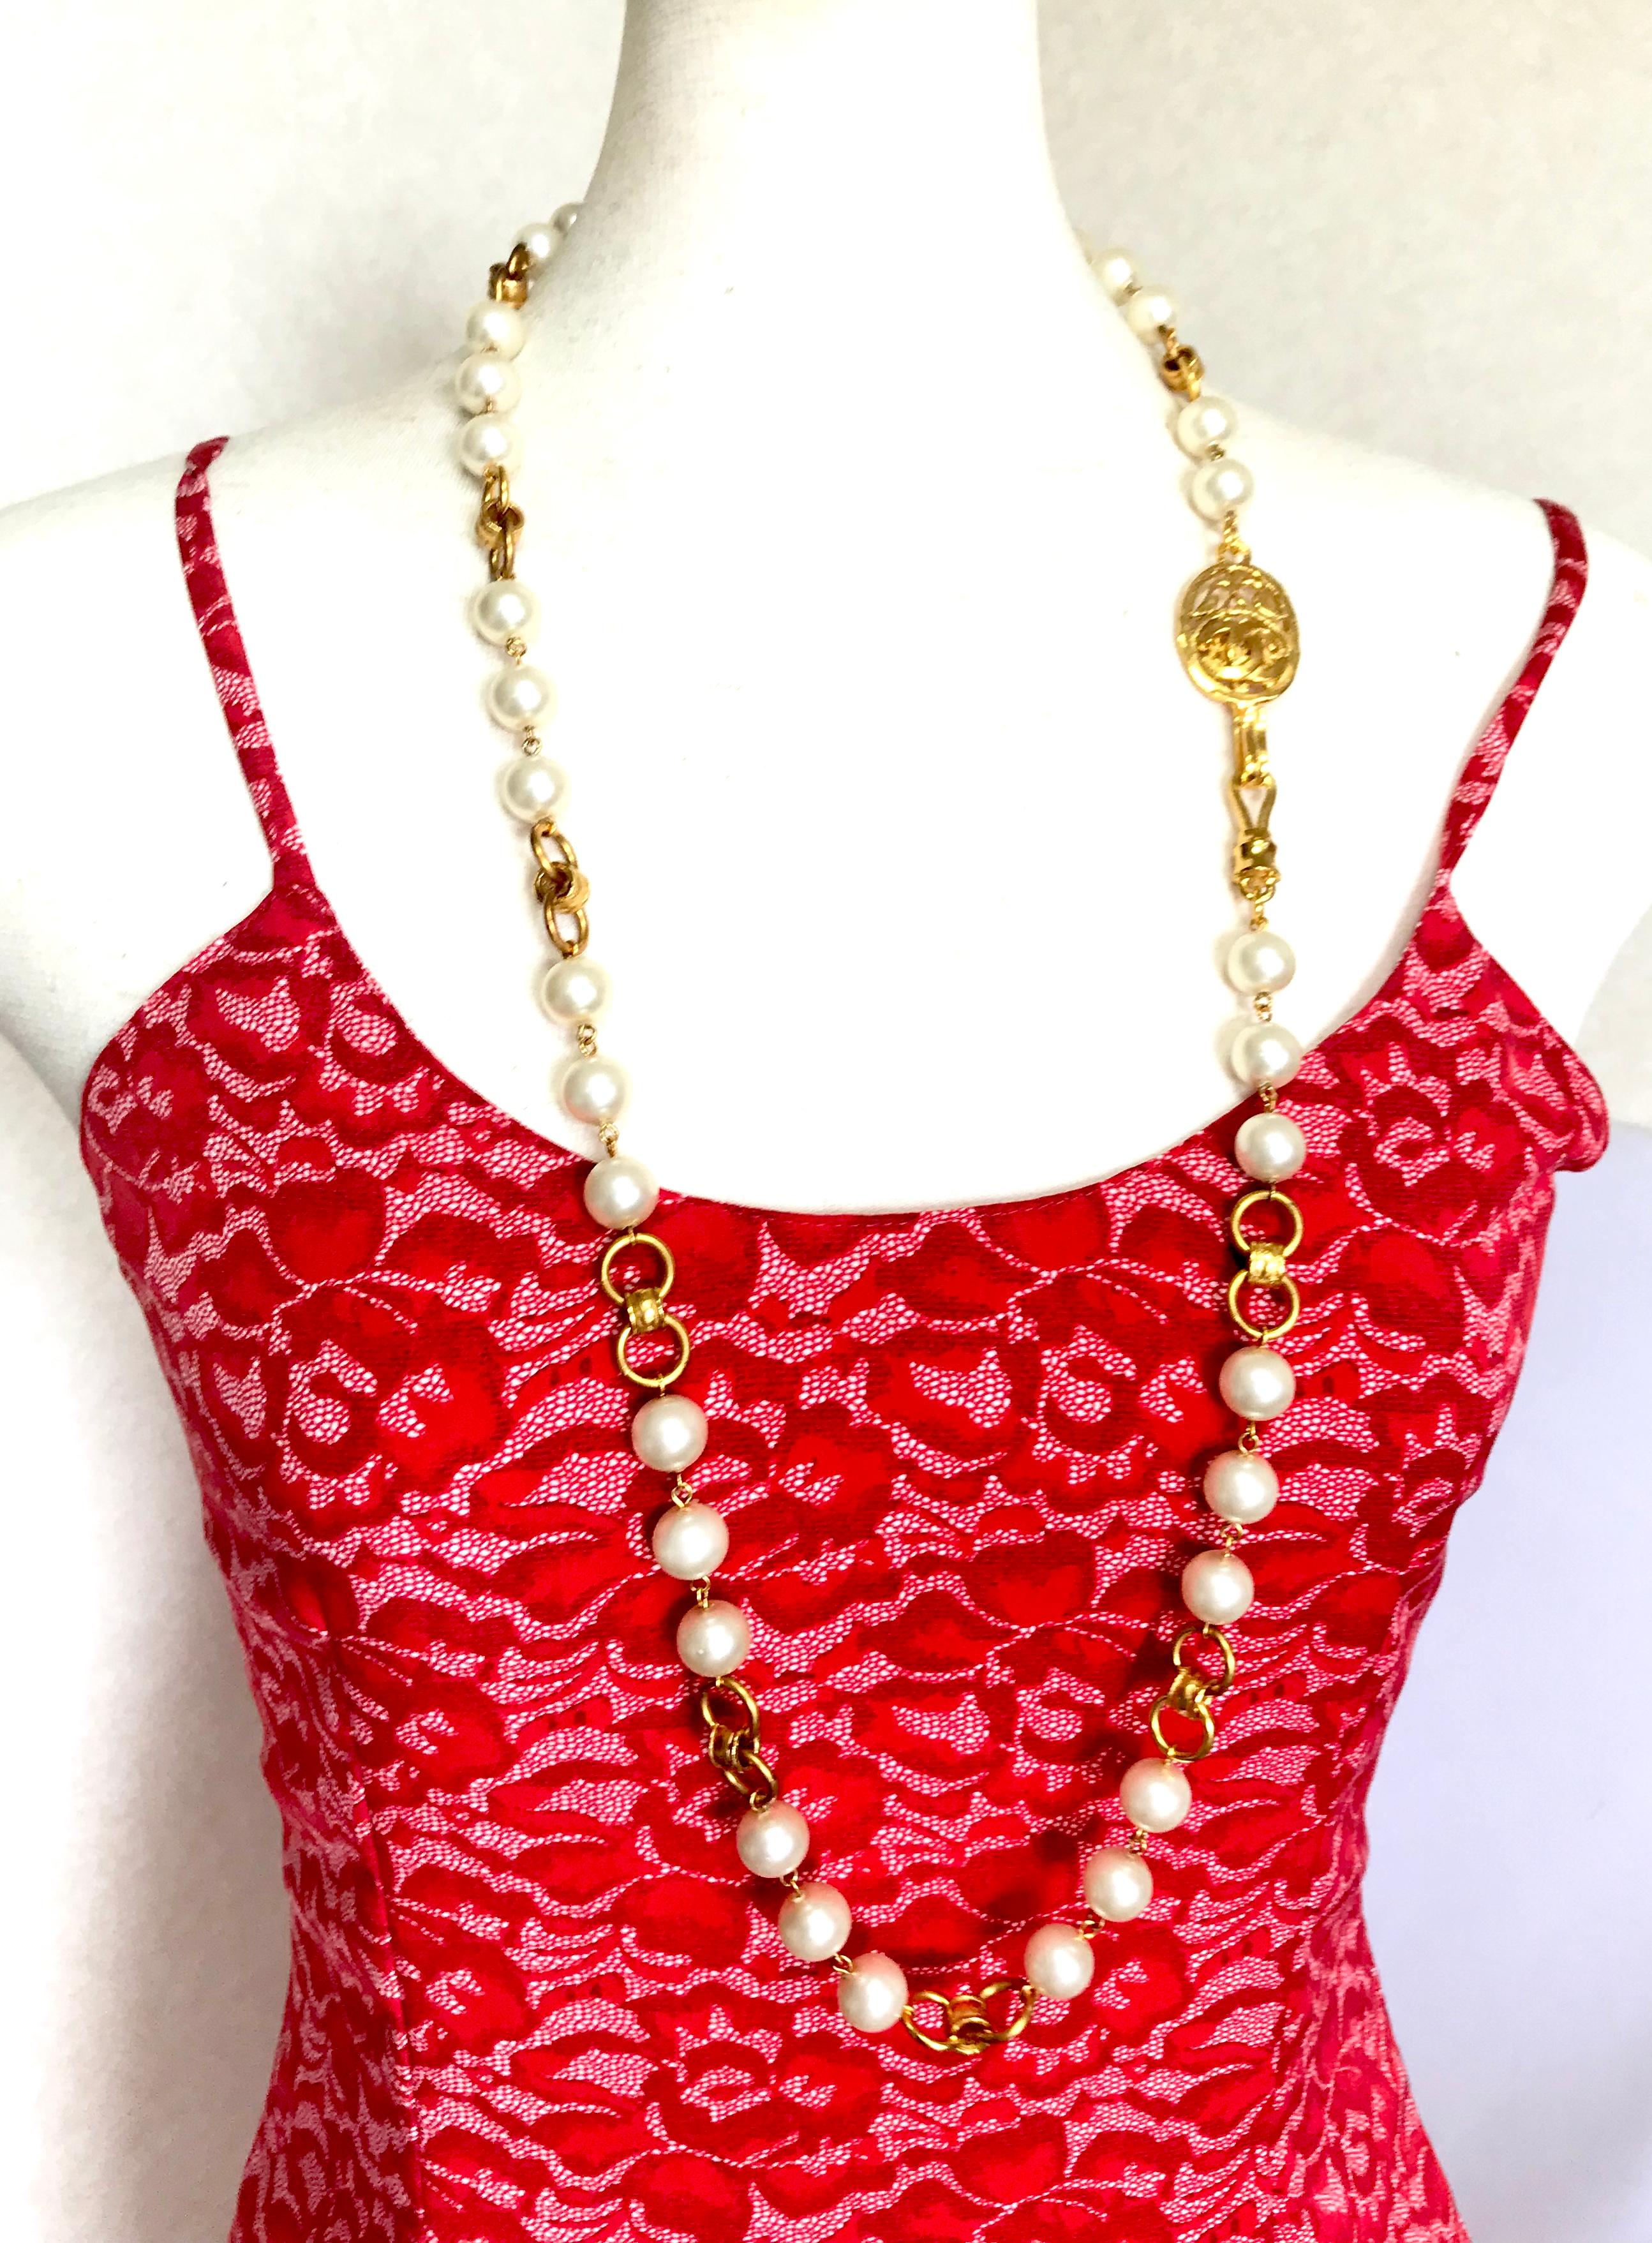 1990s. Vintage CHANEL golden long chain and faux pearl necklace with oval arabesque CC mark motif. Can be worn in double and used as a belt as well. 
Perfect and gorgeous Chanel gift.  

Depending on your outfit and feeling, you can wear it in